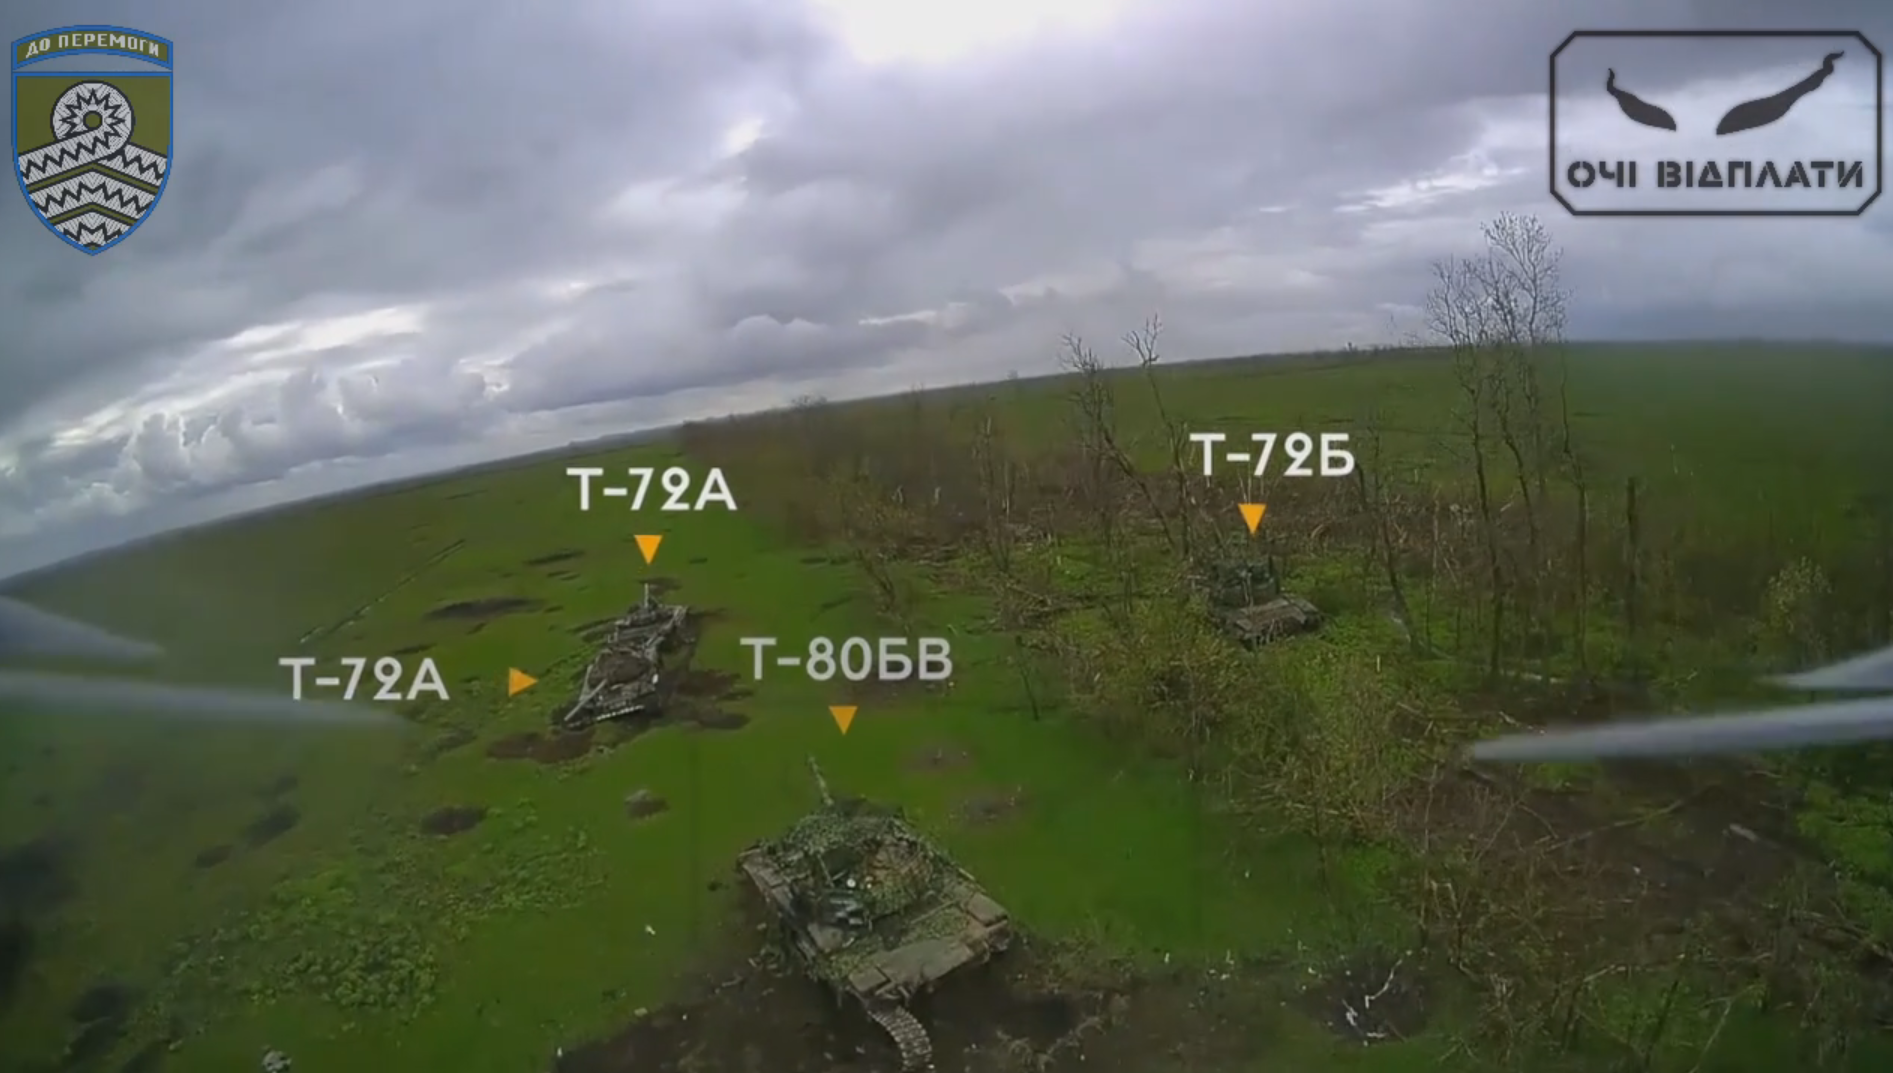 Ukrainian FPV drones for $1000 hit three Russian T-80BV, T-72A and T-72B tanks worth several million dollars